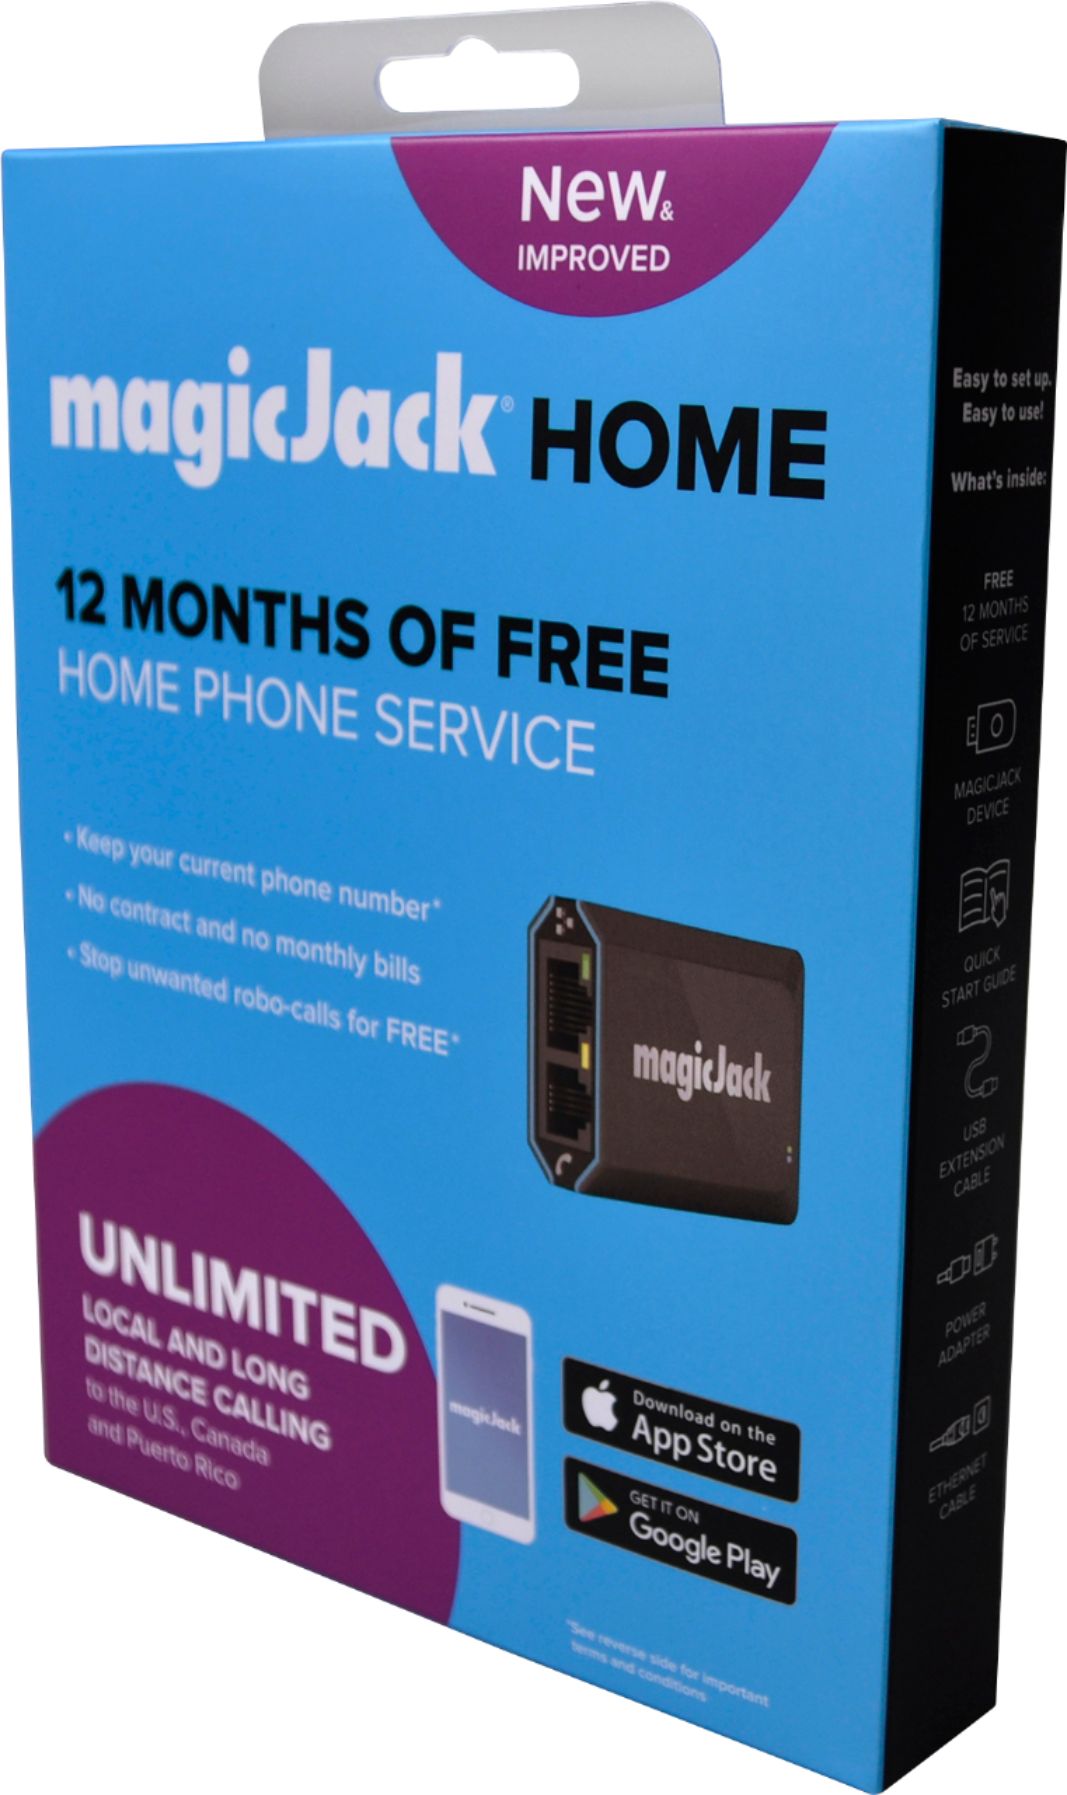 Business And On-The-Go Digital Phone Service That A Portable Home Magicjackgo 